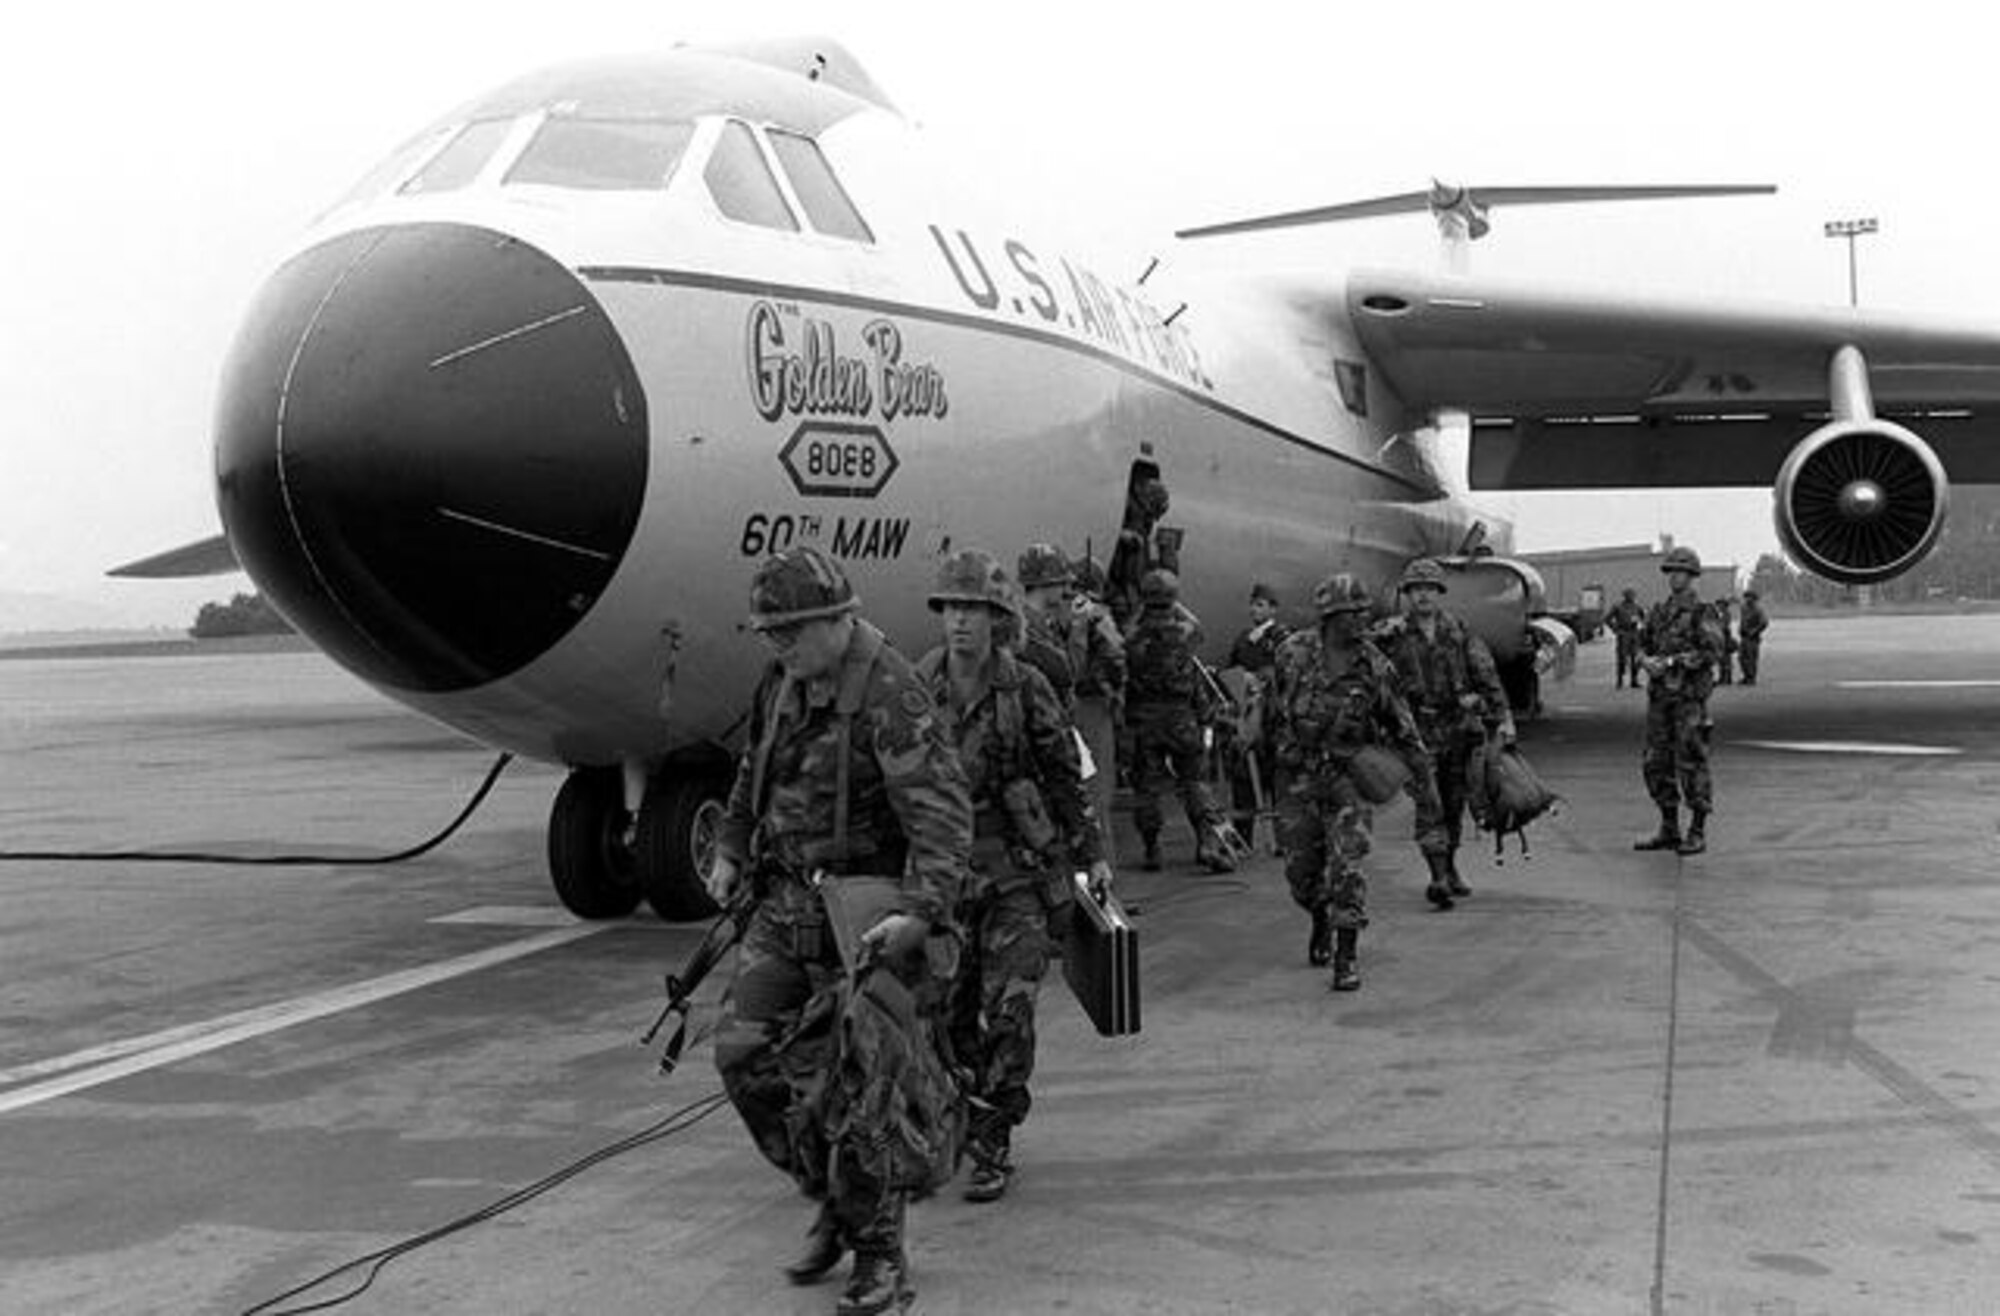 Troops disembark the Golden Bear in this undated photo. Though the last operational C-141 would depart Travis on Dec. 16, 1997, the Golden Bear would stay on at the base as a testament of everlasting endurance. On Sept. 16, 2005, the Golden Bear was dedicated as an aircraft display by the men and women of Travis. (U.S. Air Force photo)